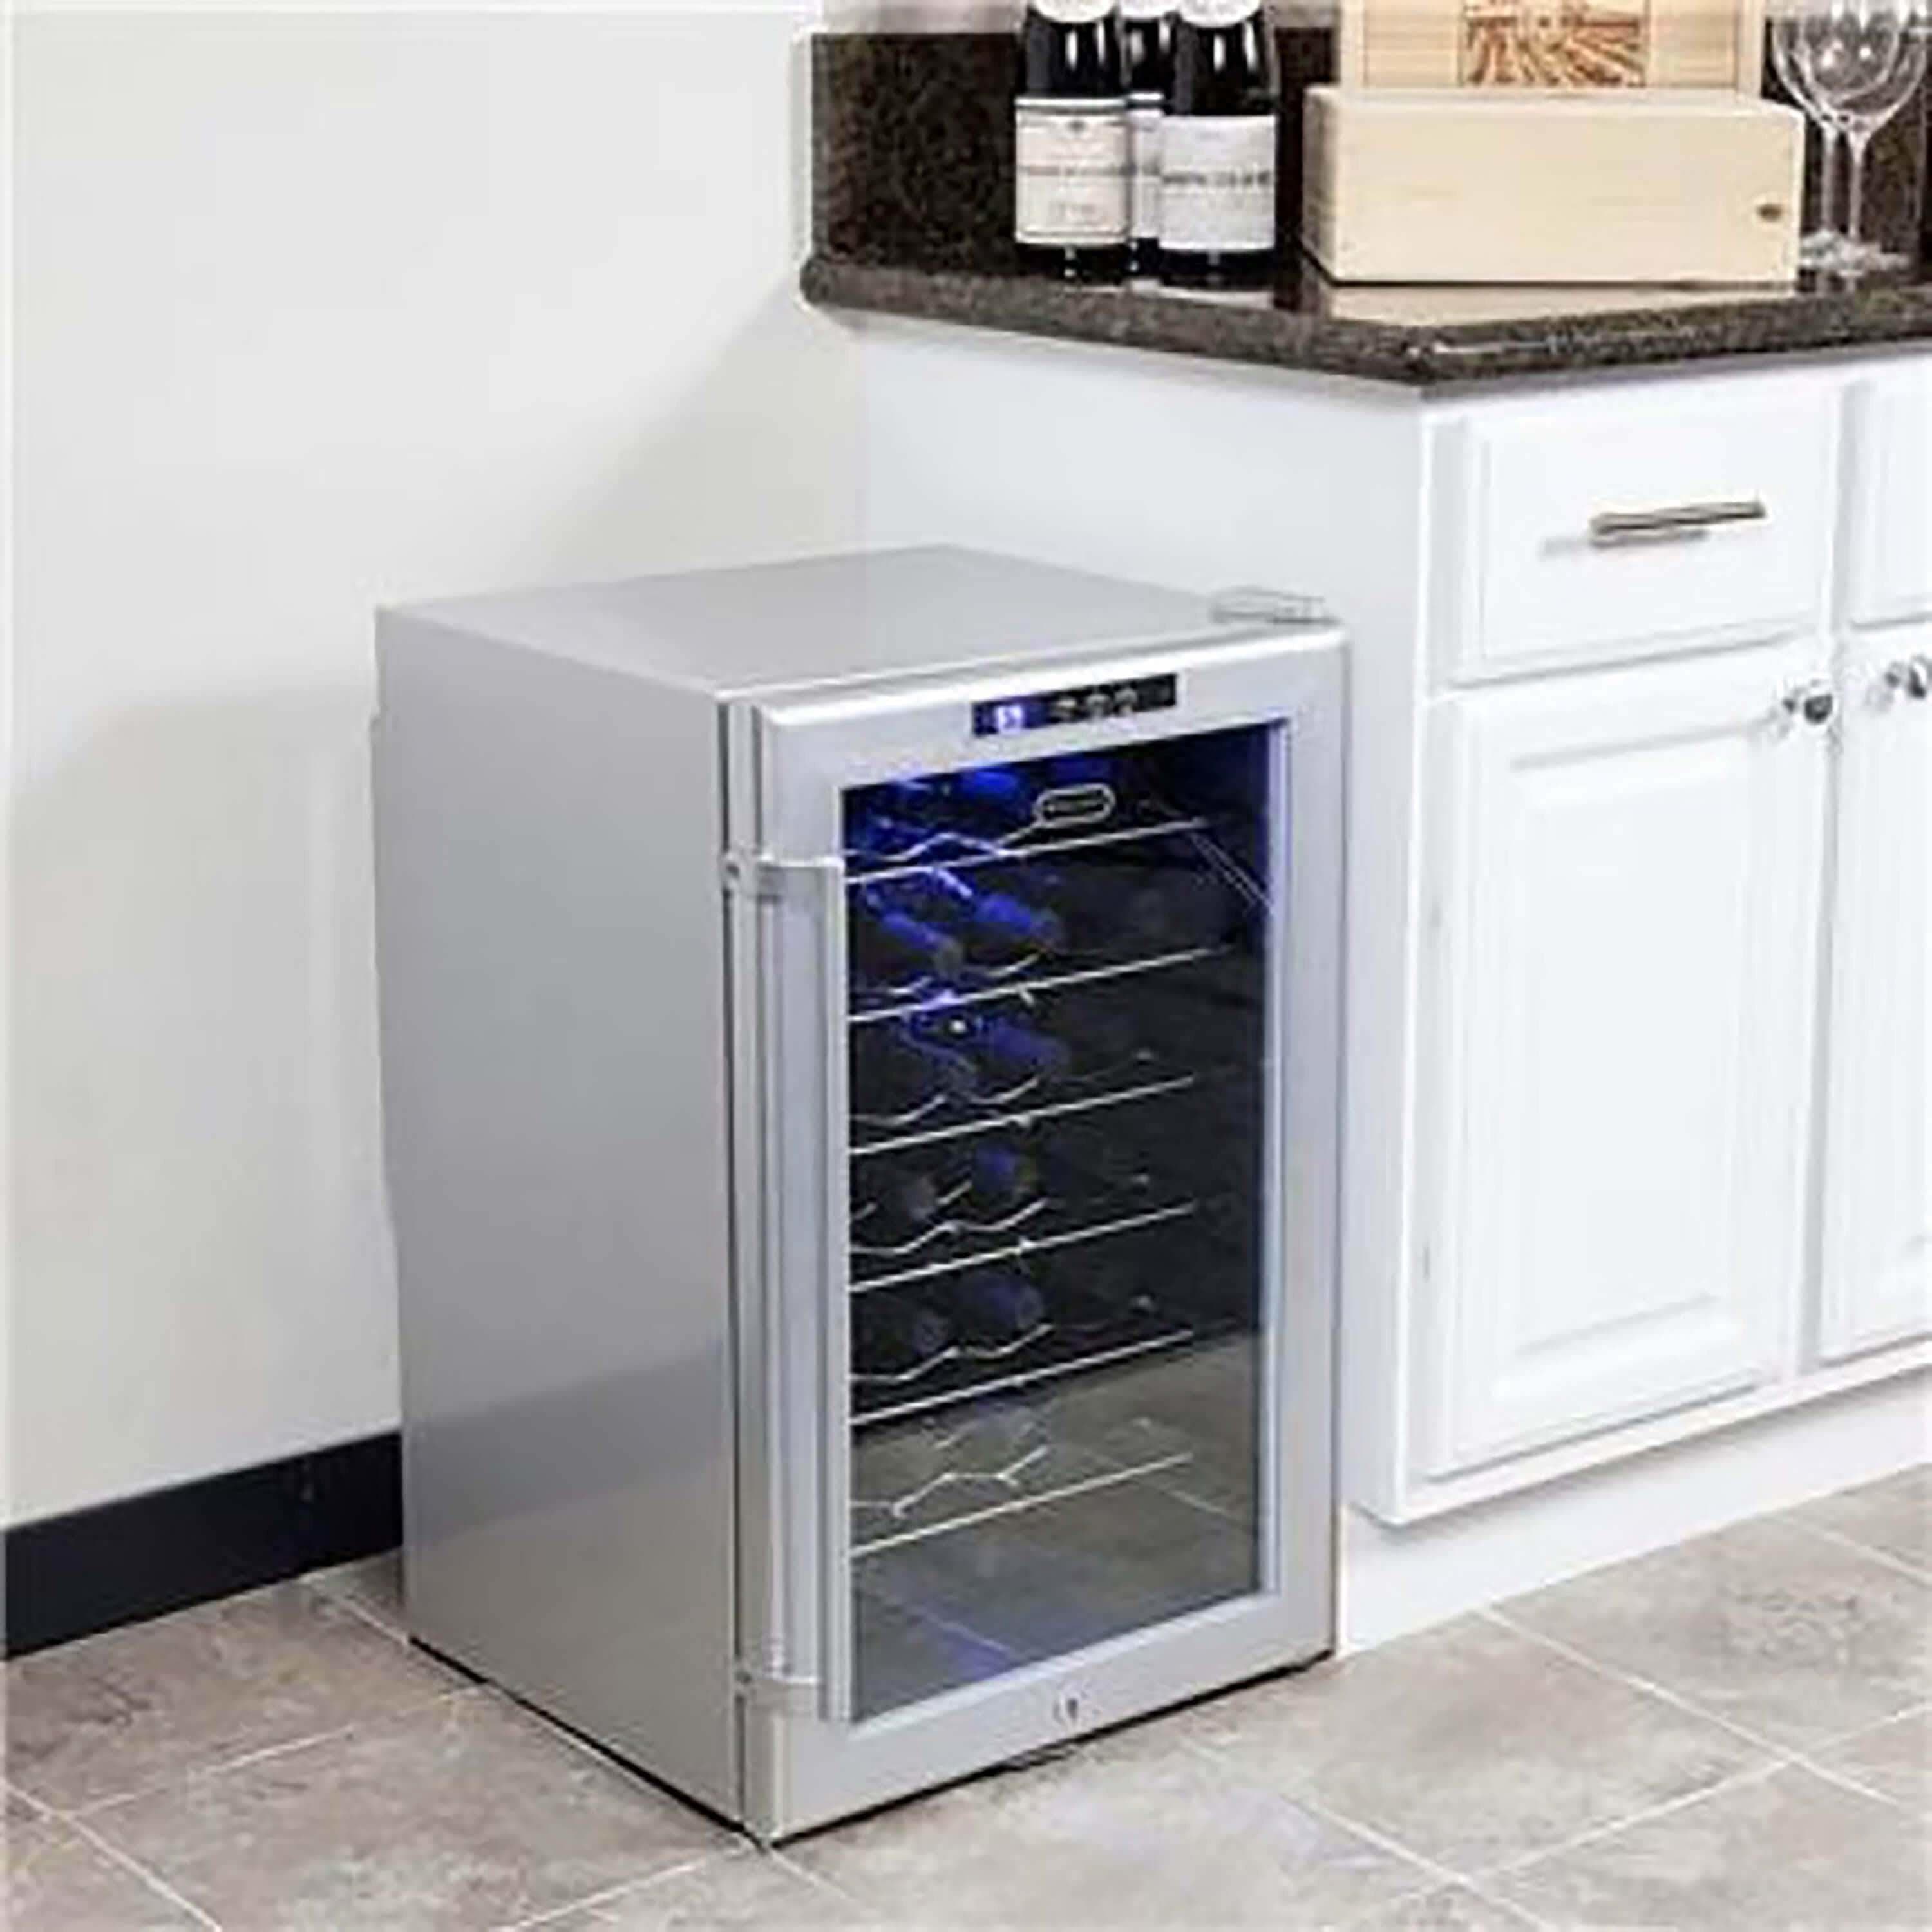 Whynter SNO 28 Bottles Wine Cooler - Platinum with lock  WC-28S Wine Coolers Empire